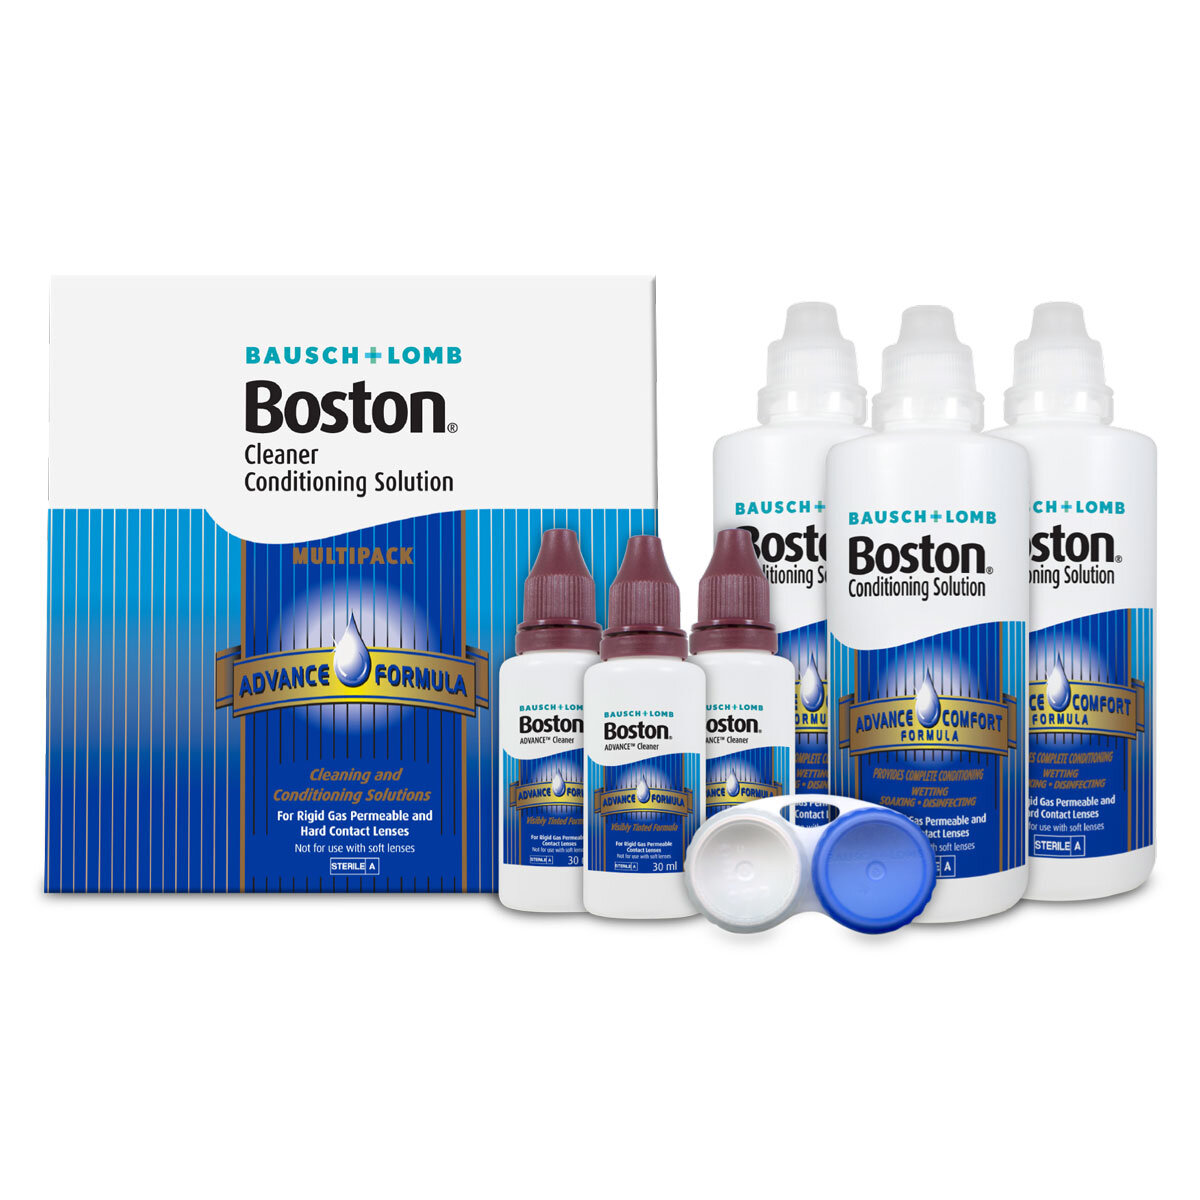 Blue and white box of contact lenses cleaning solutions - 6 bottles in front and pack to put lenses in